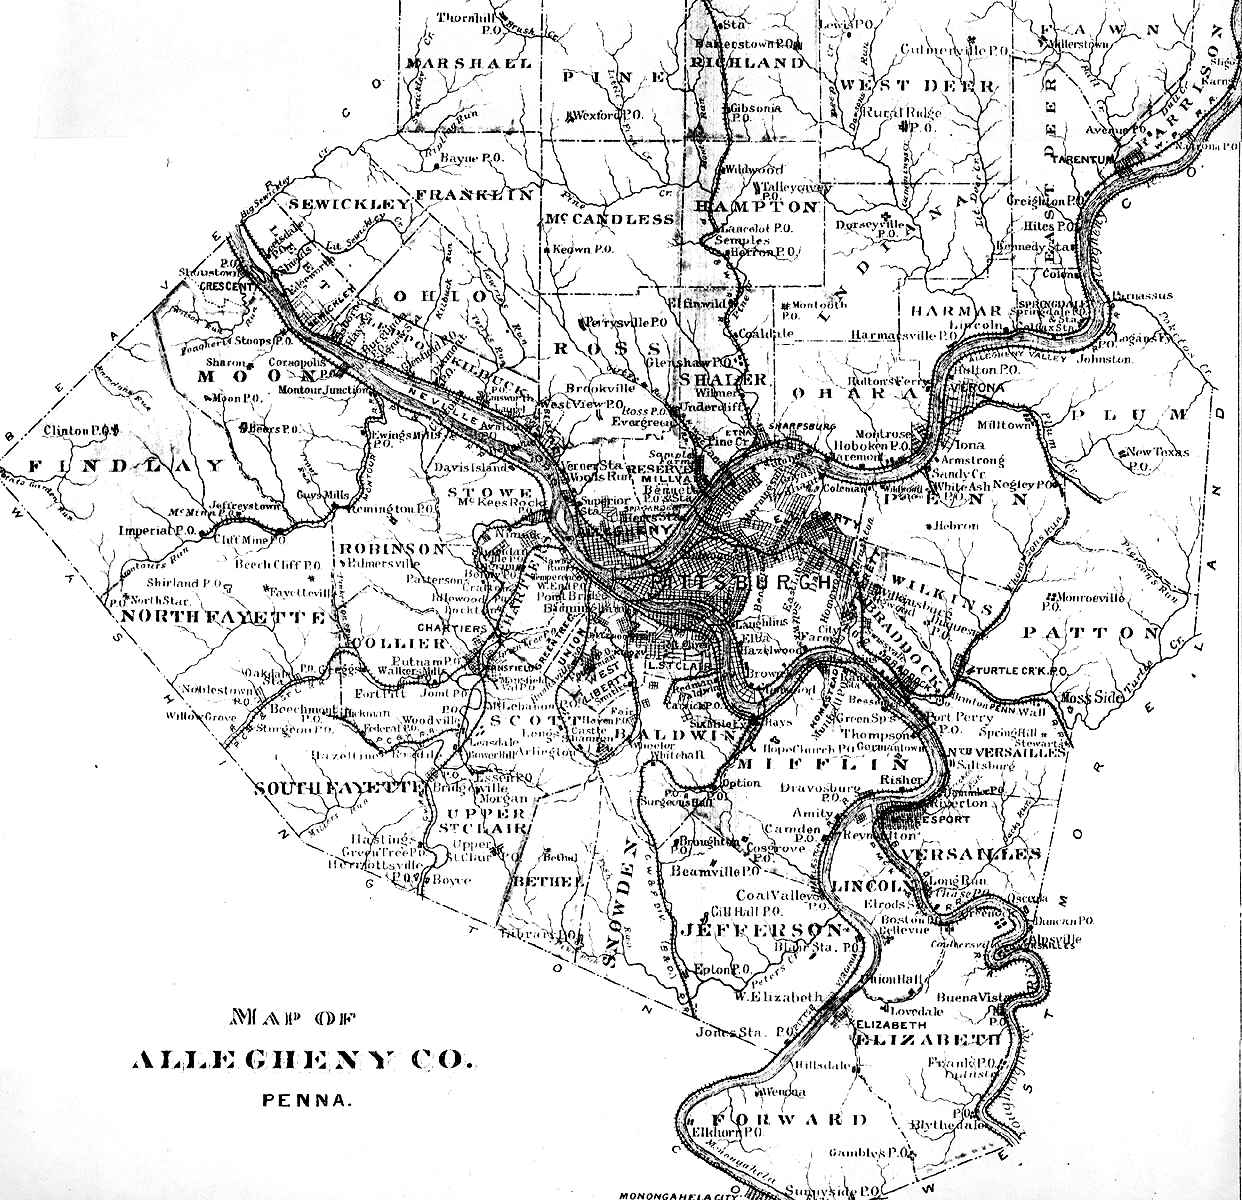 Allegheny County ca.1880